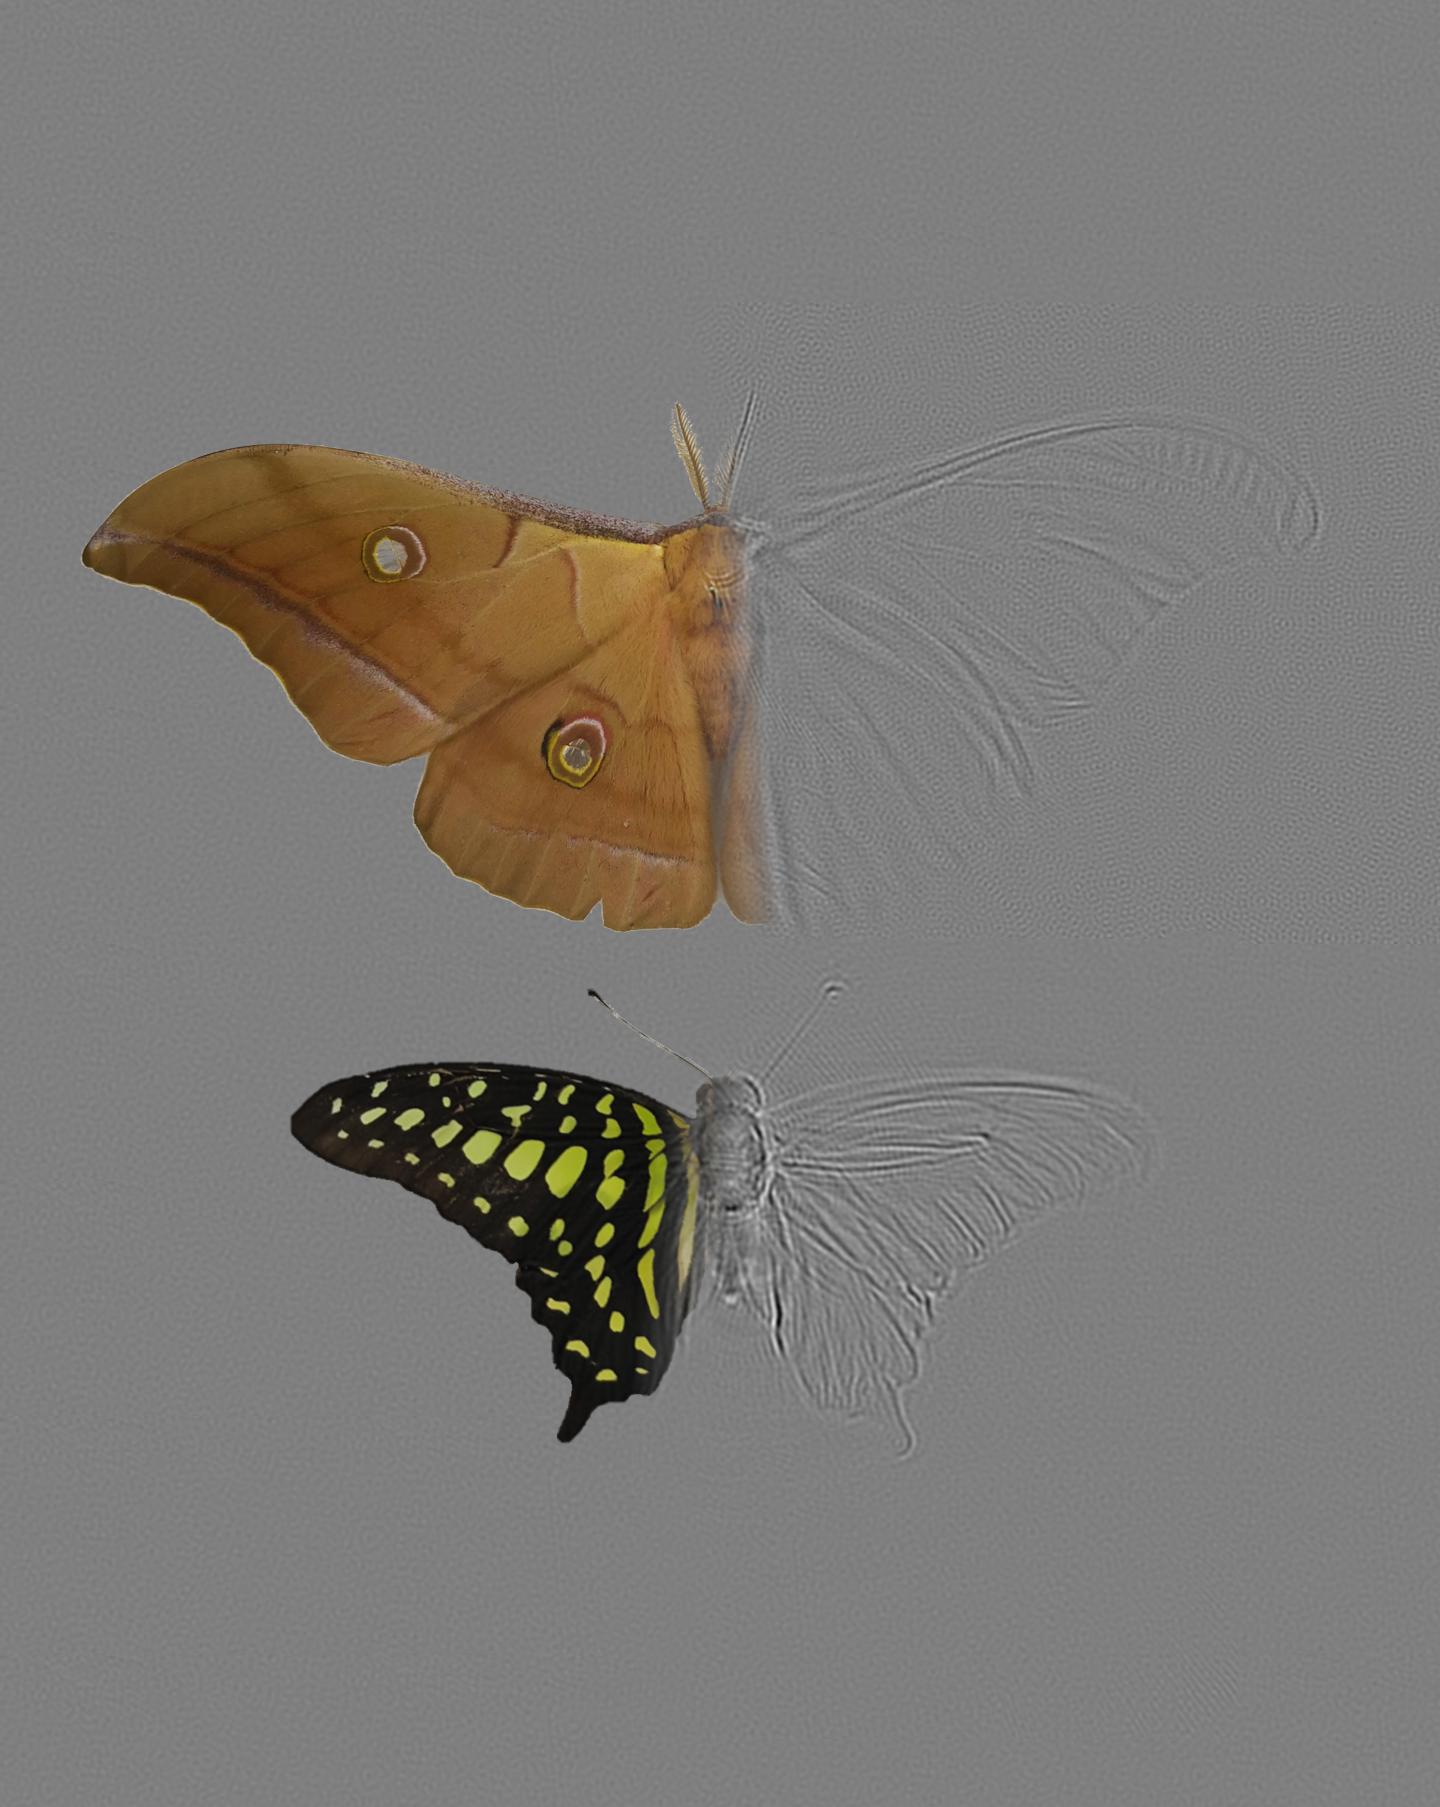 Moths strike out in evolutionary arms race with sophisticated wing design